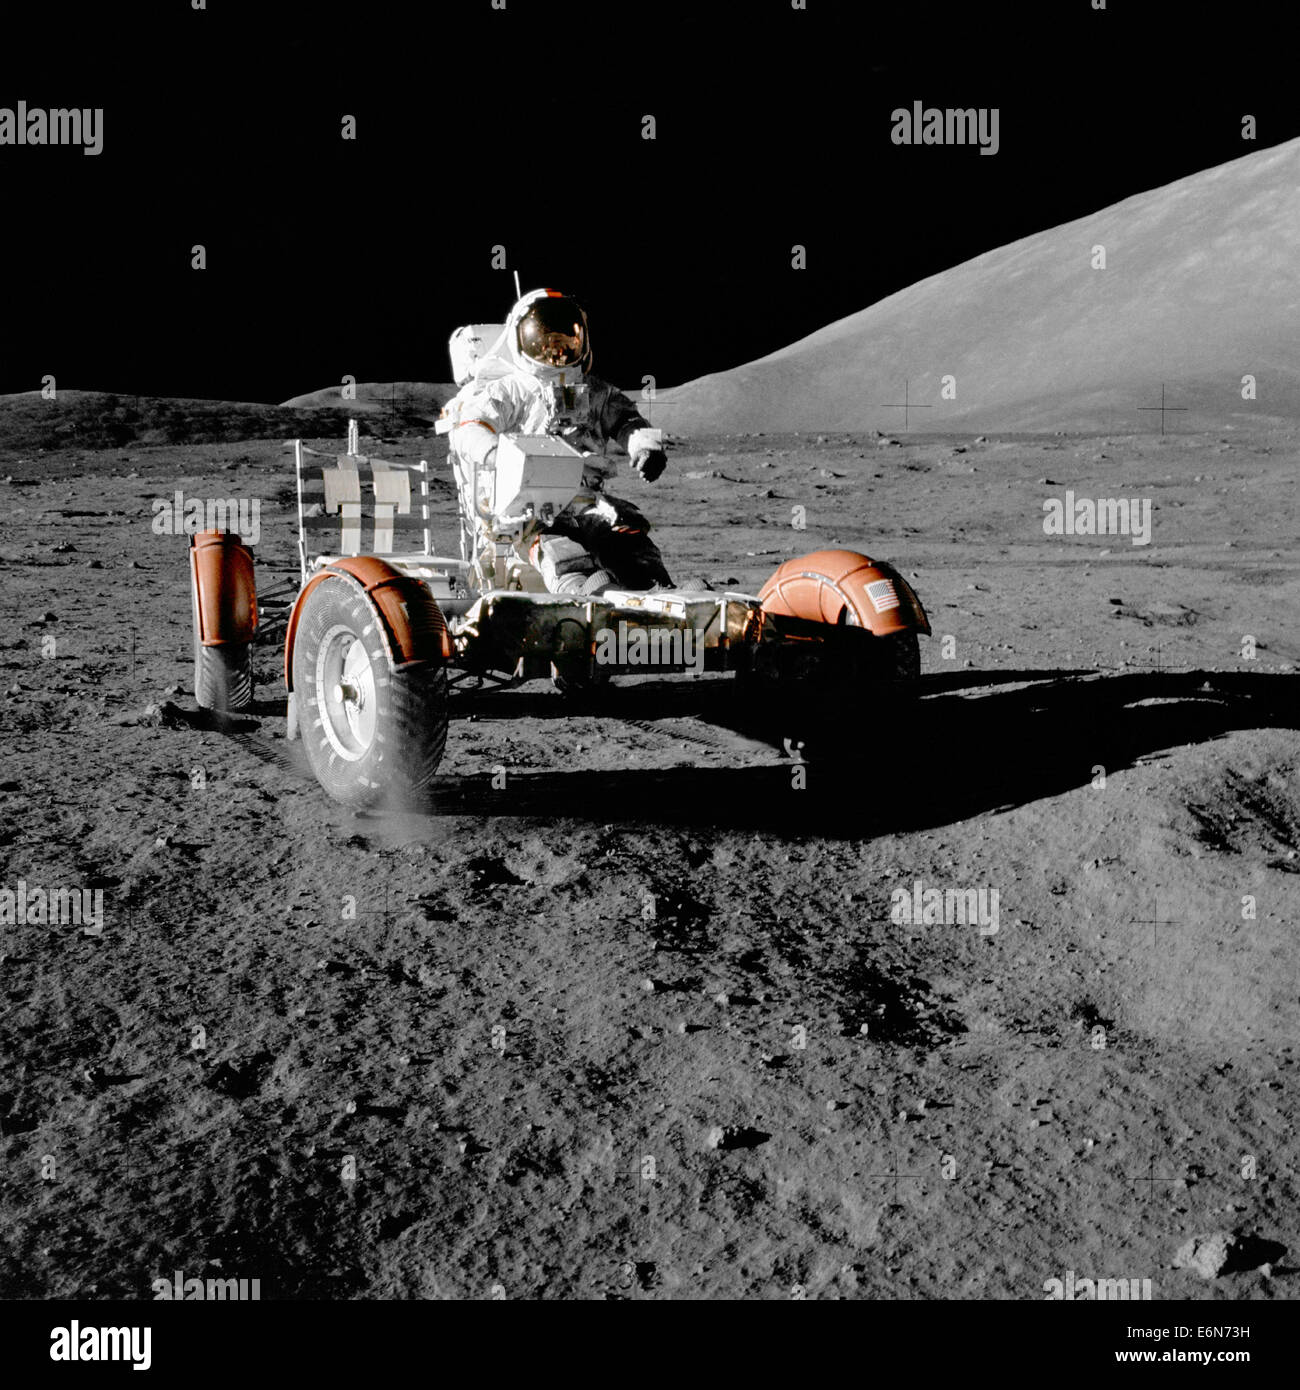 NASA astronaut Eugene Cernan, Commander, Apollo 17, tests the Lunar Roving Vehicle during the early part of the first Apollo 17 Extravehicular Activity at the Taurus-Littrow landing site December 11, 1972. This view of the stripped down LRV prior to loading up with scientific equipment. The mountain in the right background is the east end of South Massif. While astronauts Cernan and Jack Schmitt descended in the Challenger to explore the Taurus-Littrow region of the Moon, astronaut Ronald E. Evans, Command Module pilot, remained with the Command Service Module 'America' in lunar-orbit. Stock Photo